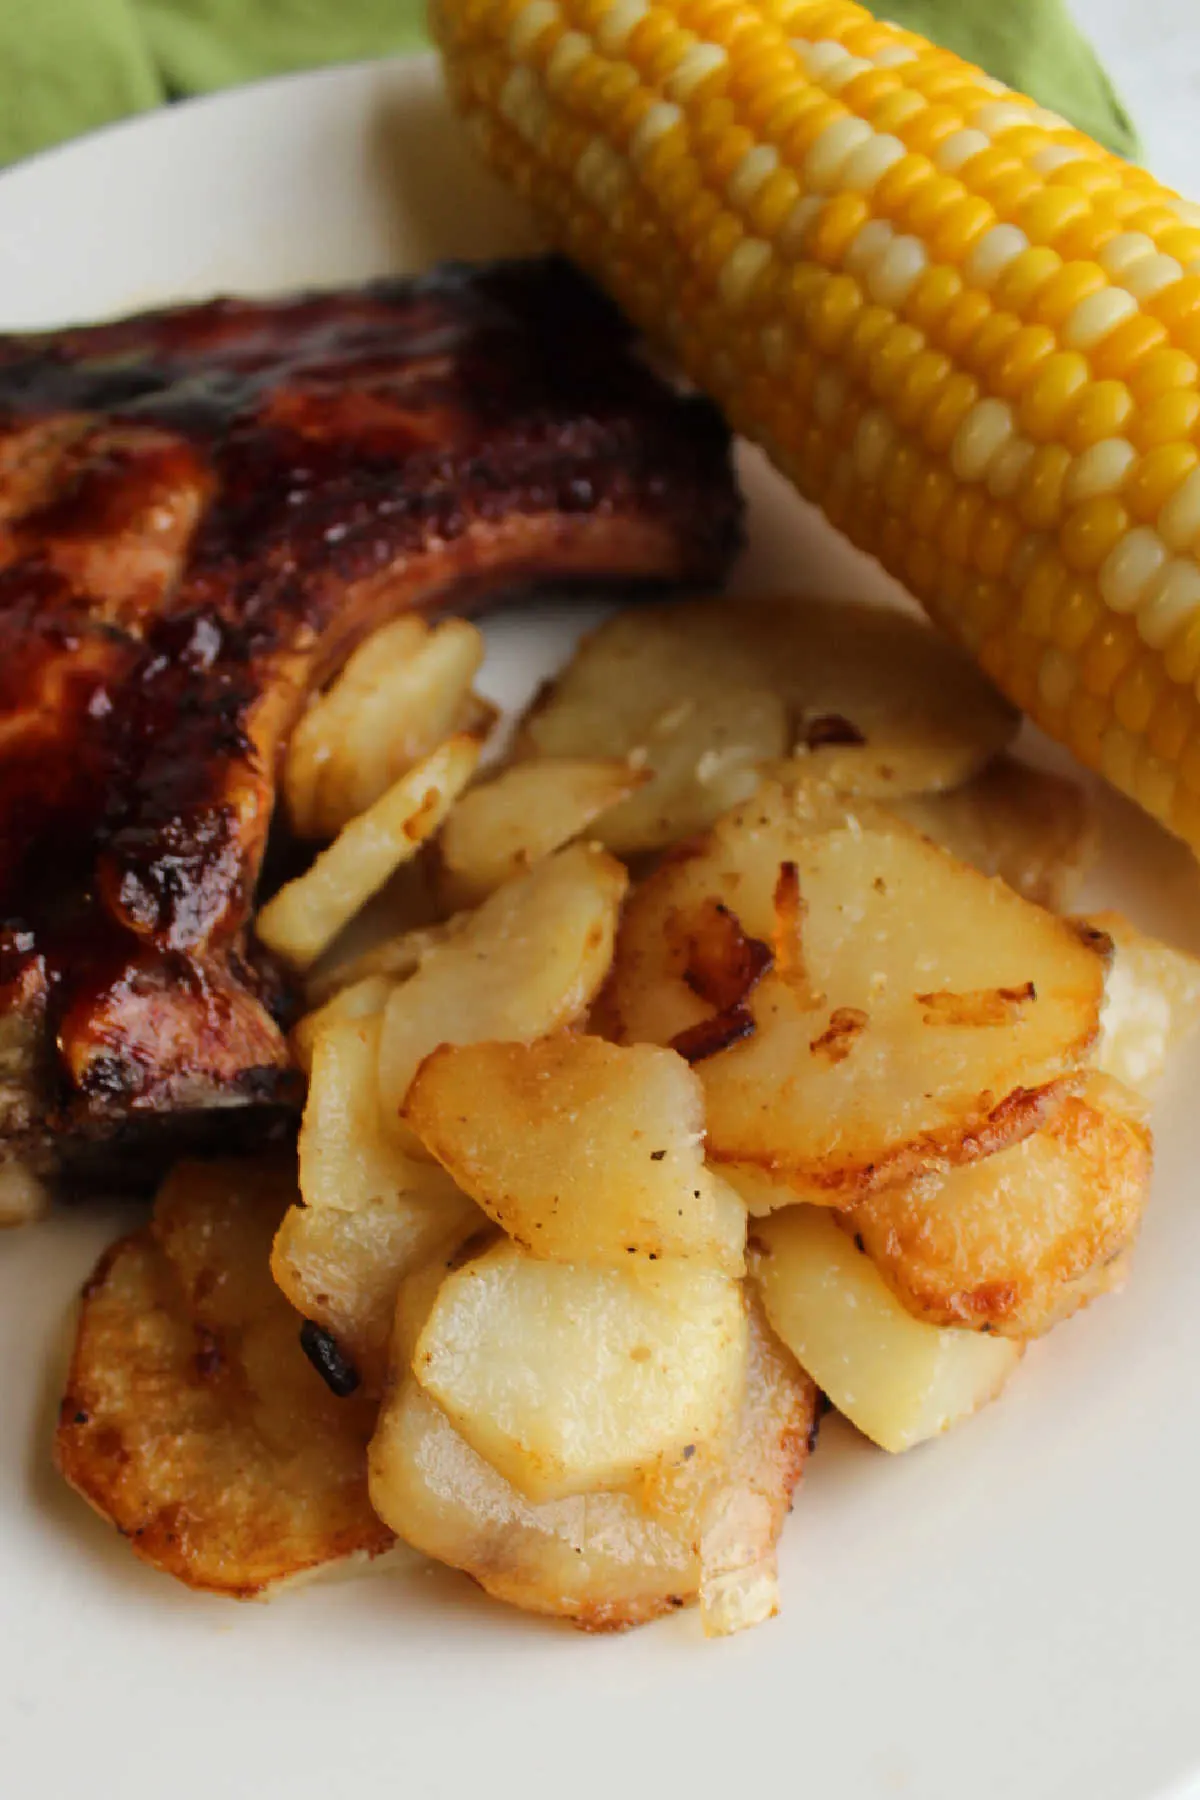 Close up of fried potatoes on plate with corn and pork chop in background.